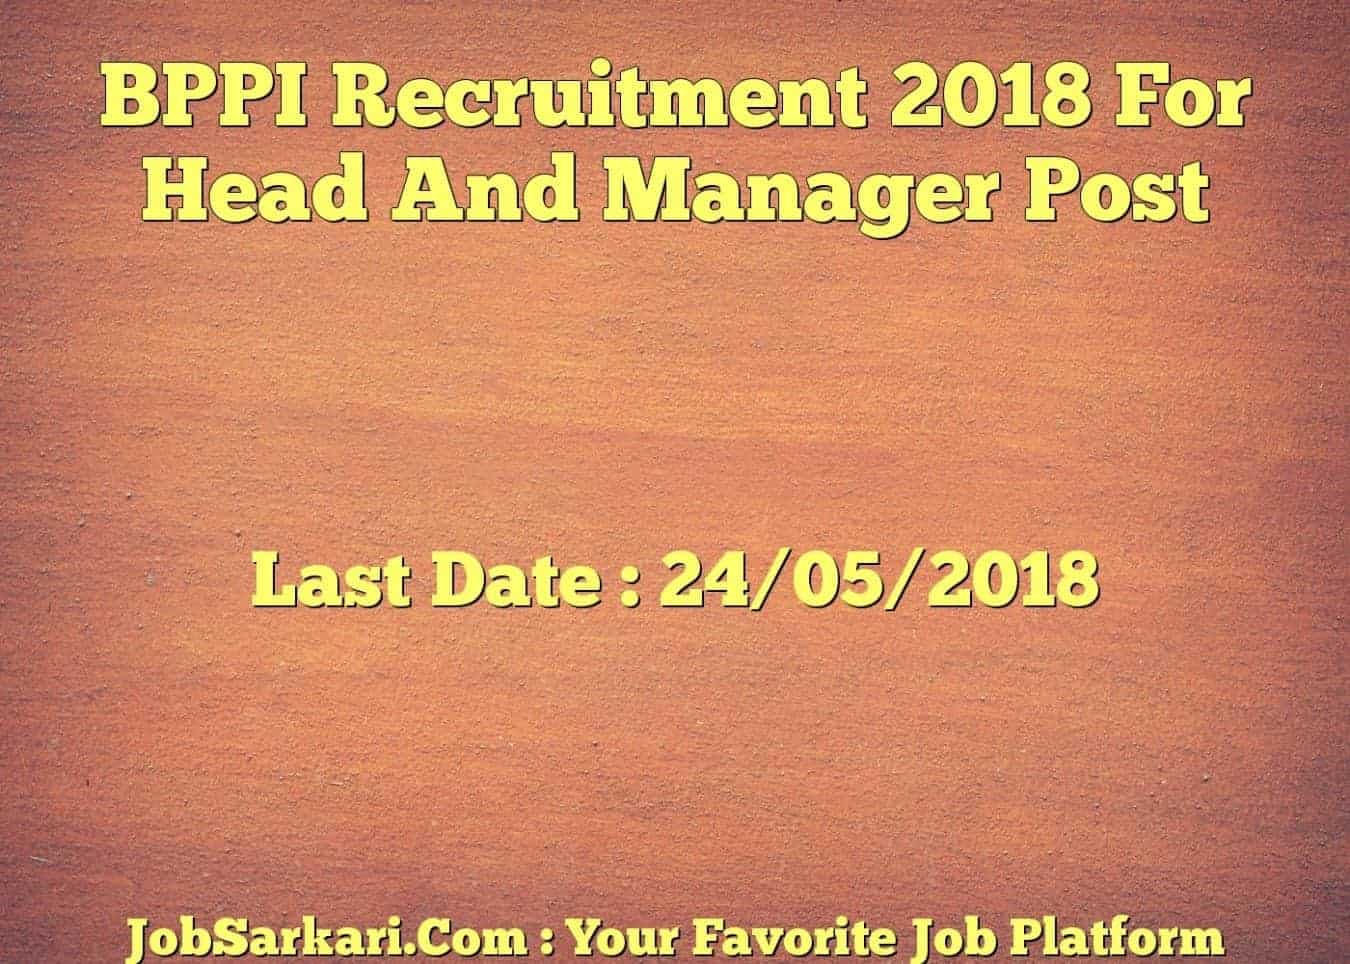 BPPI Recruitment 2018 For Head And Manager Post